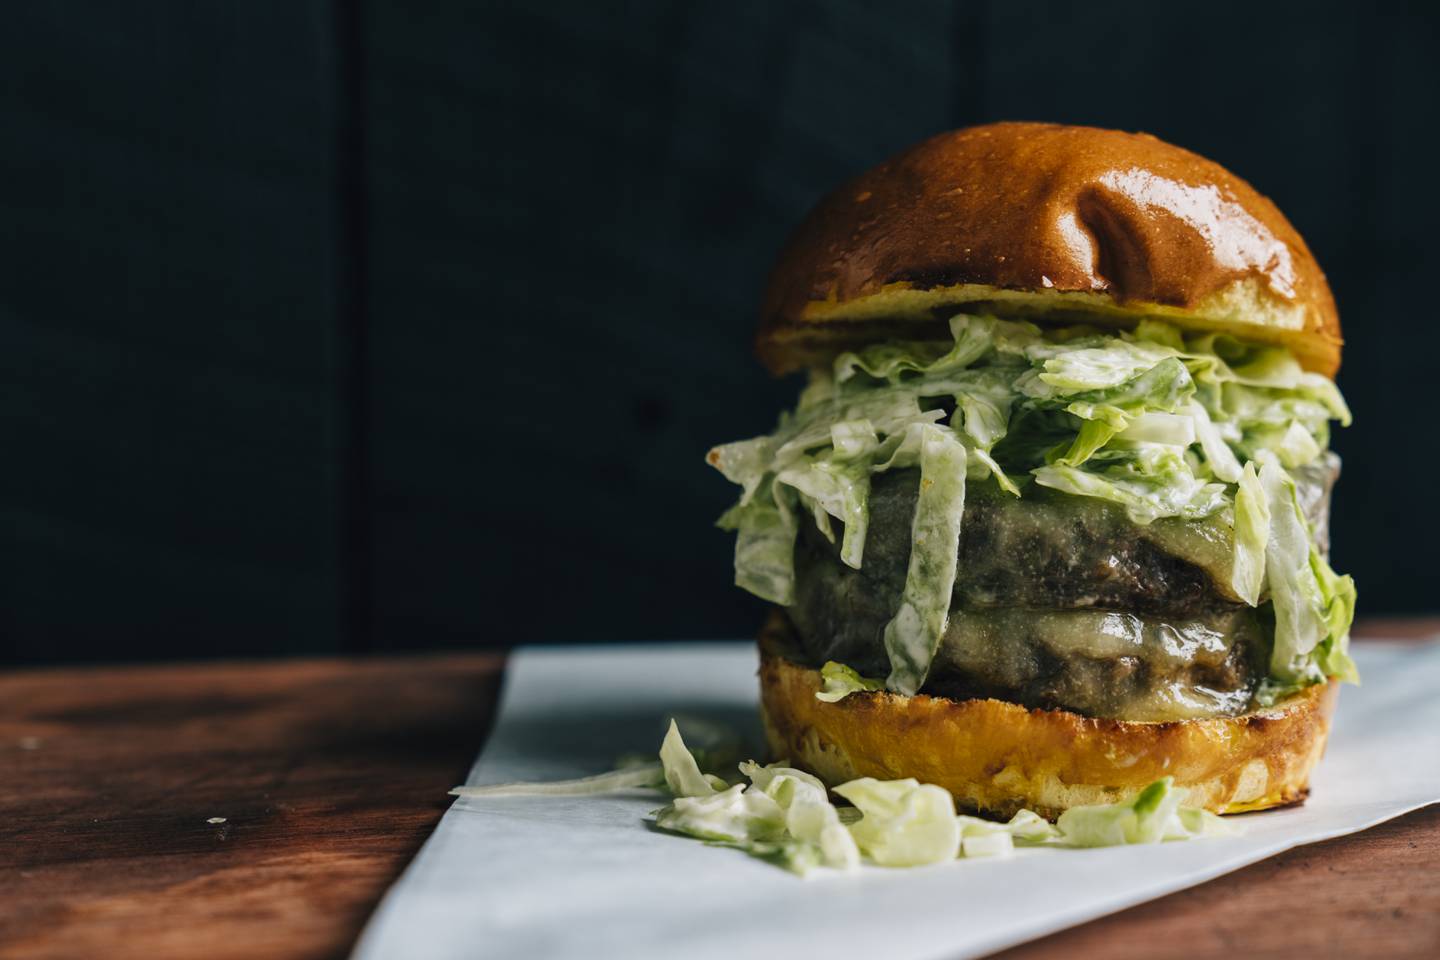 The DM Burger features a medium-rare patty topped with Vermont cheddar cheese, shaved onion and lettuce, and secret sauce on a brioche bun. Photo: Josh Telles